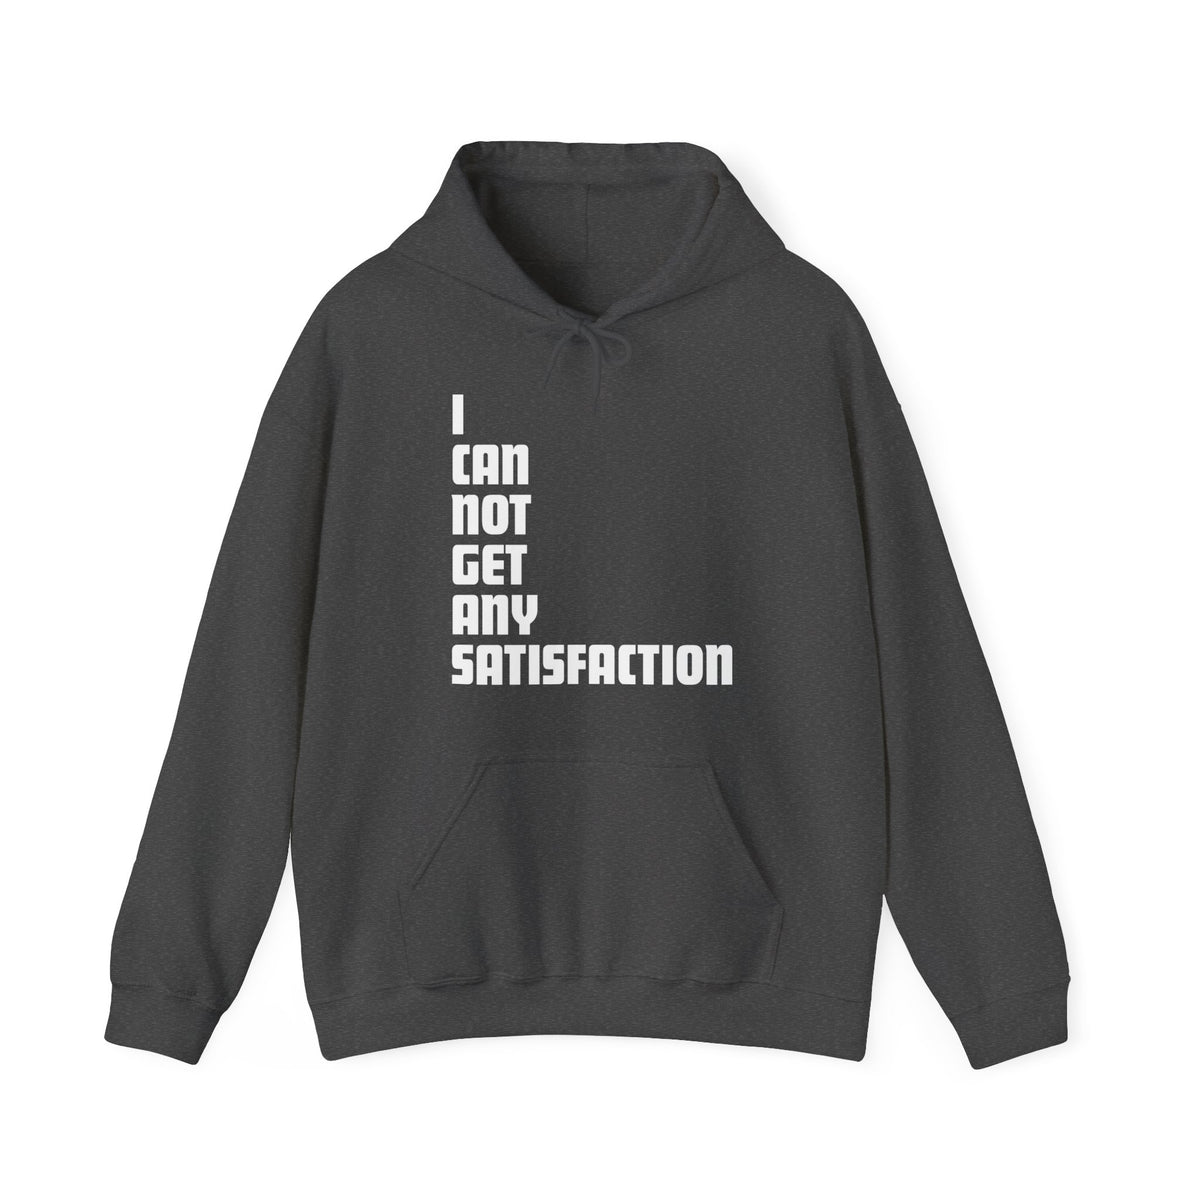 I Can Not Get Any Satisfaction - Hoodie